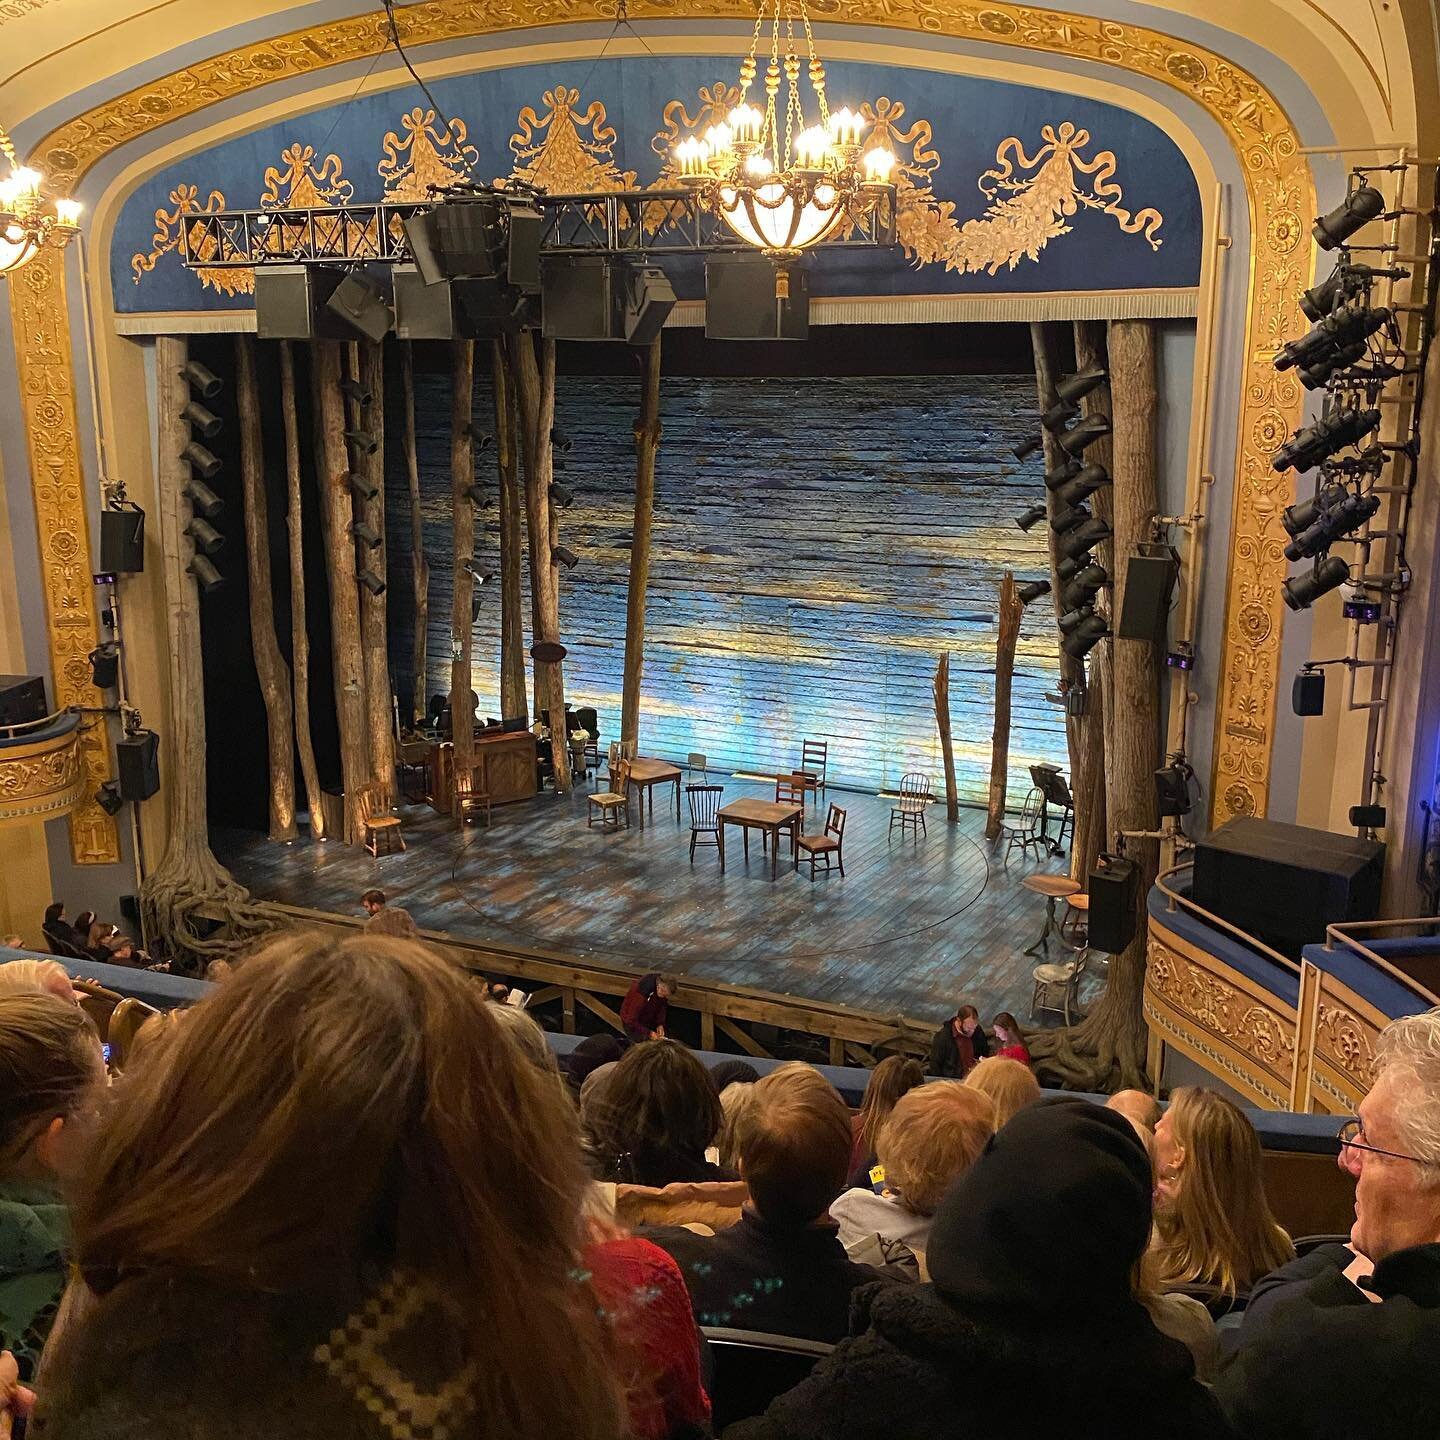 Seeing Come From Away tonight